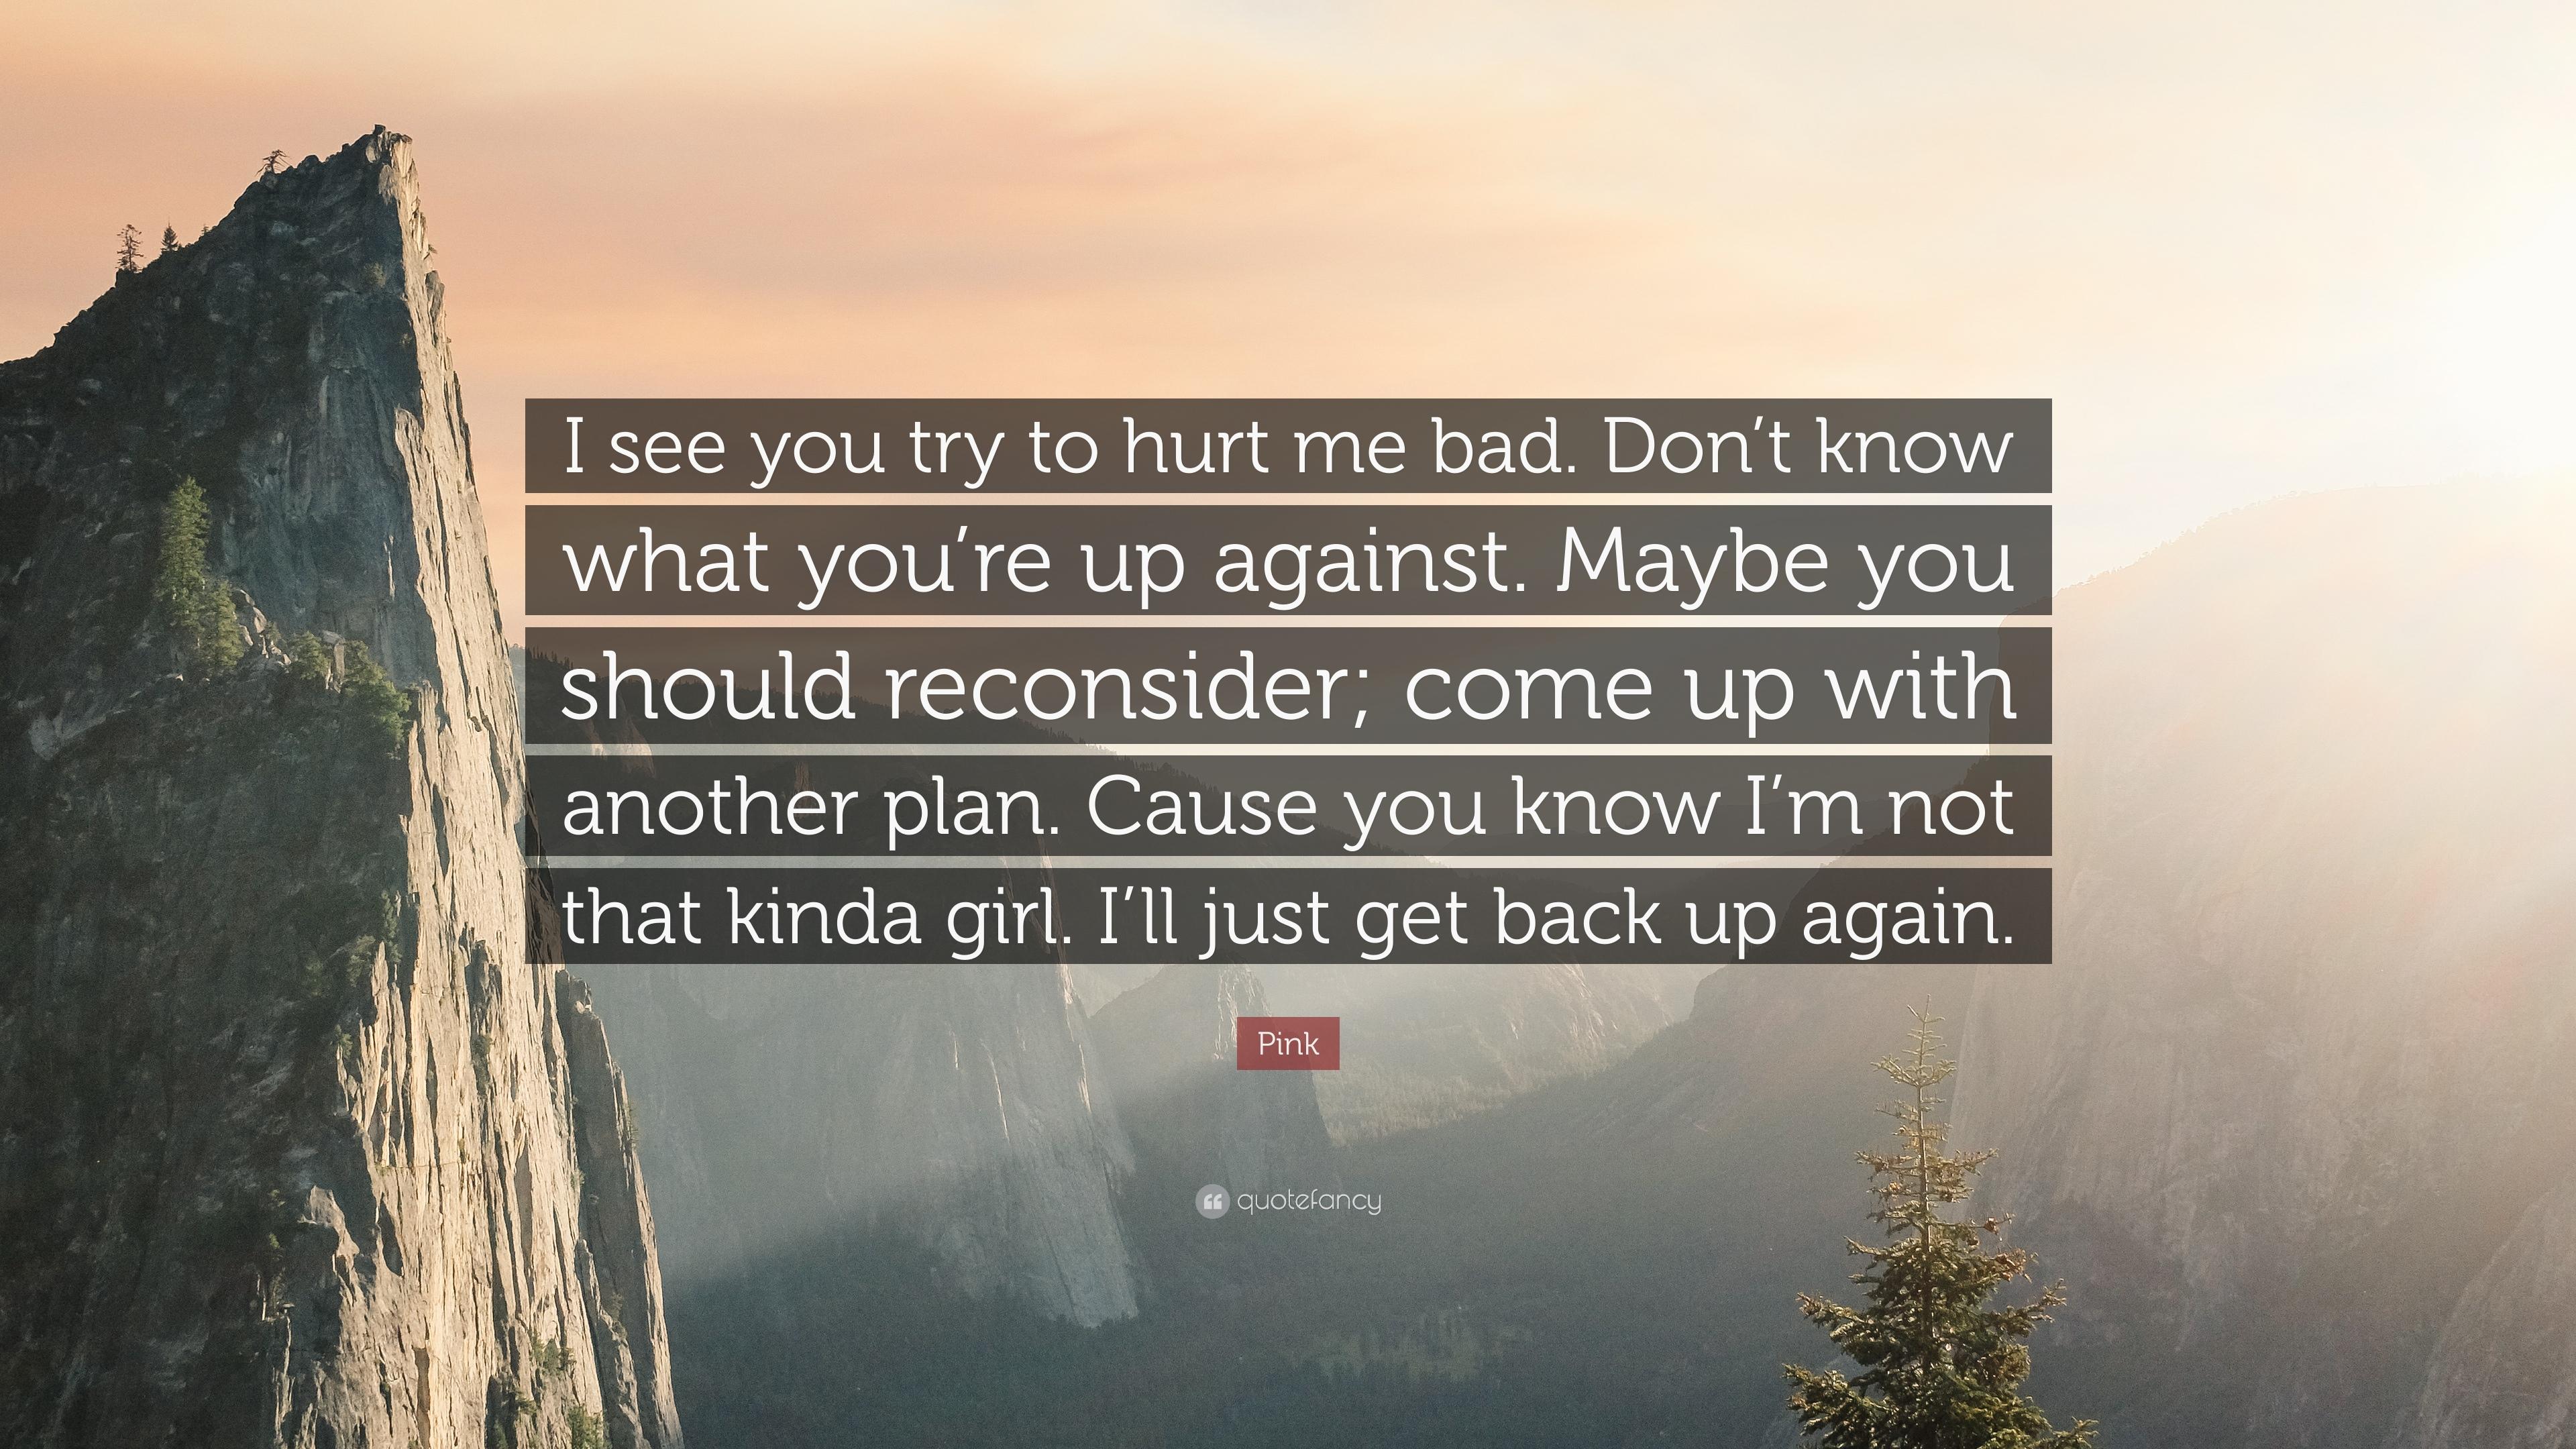 Pink Quote: “I see you try to hurt me bad. Don't know what you're up